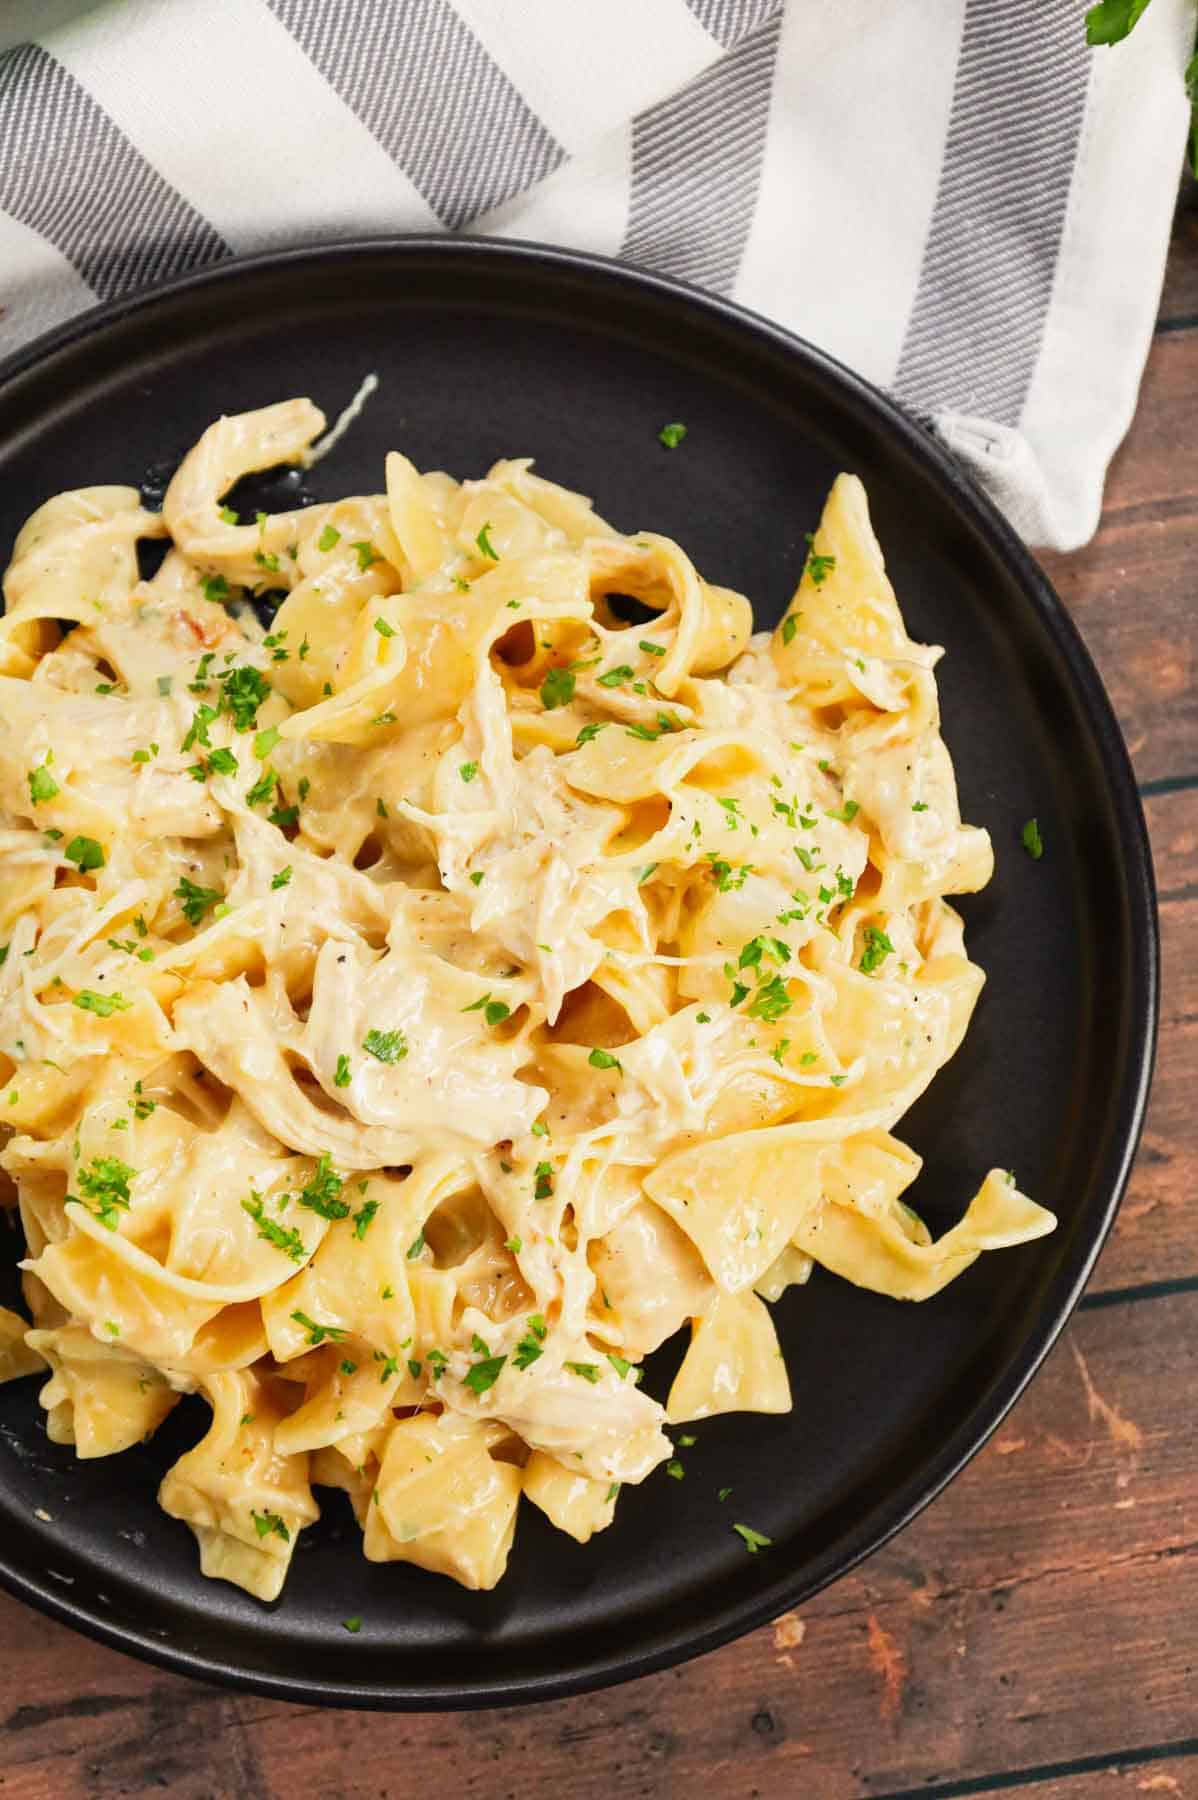 Chicken and Egg Noodles is a simple comfort food dish made with shredded rotisserie chicken, extra broad egg noodles, diced onion, cream of chicken soup and milk.